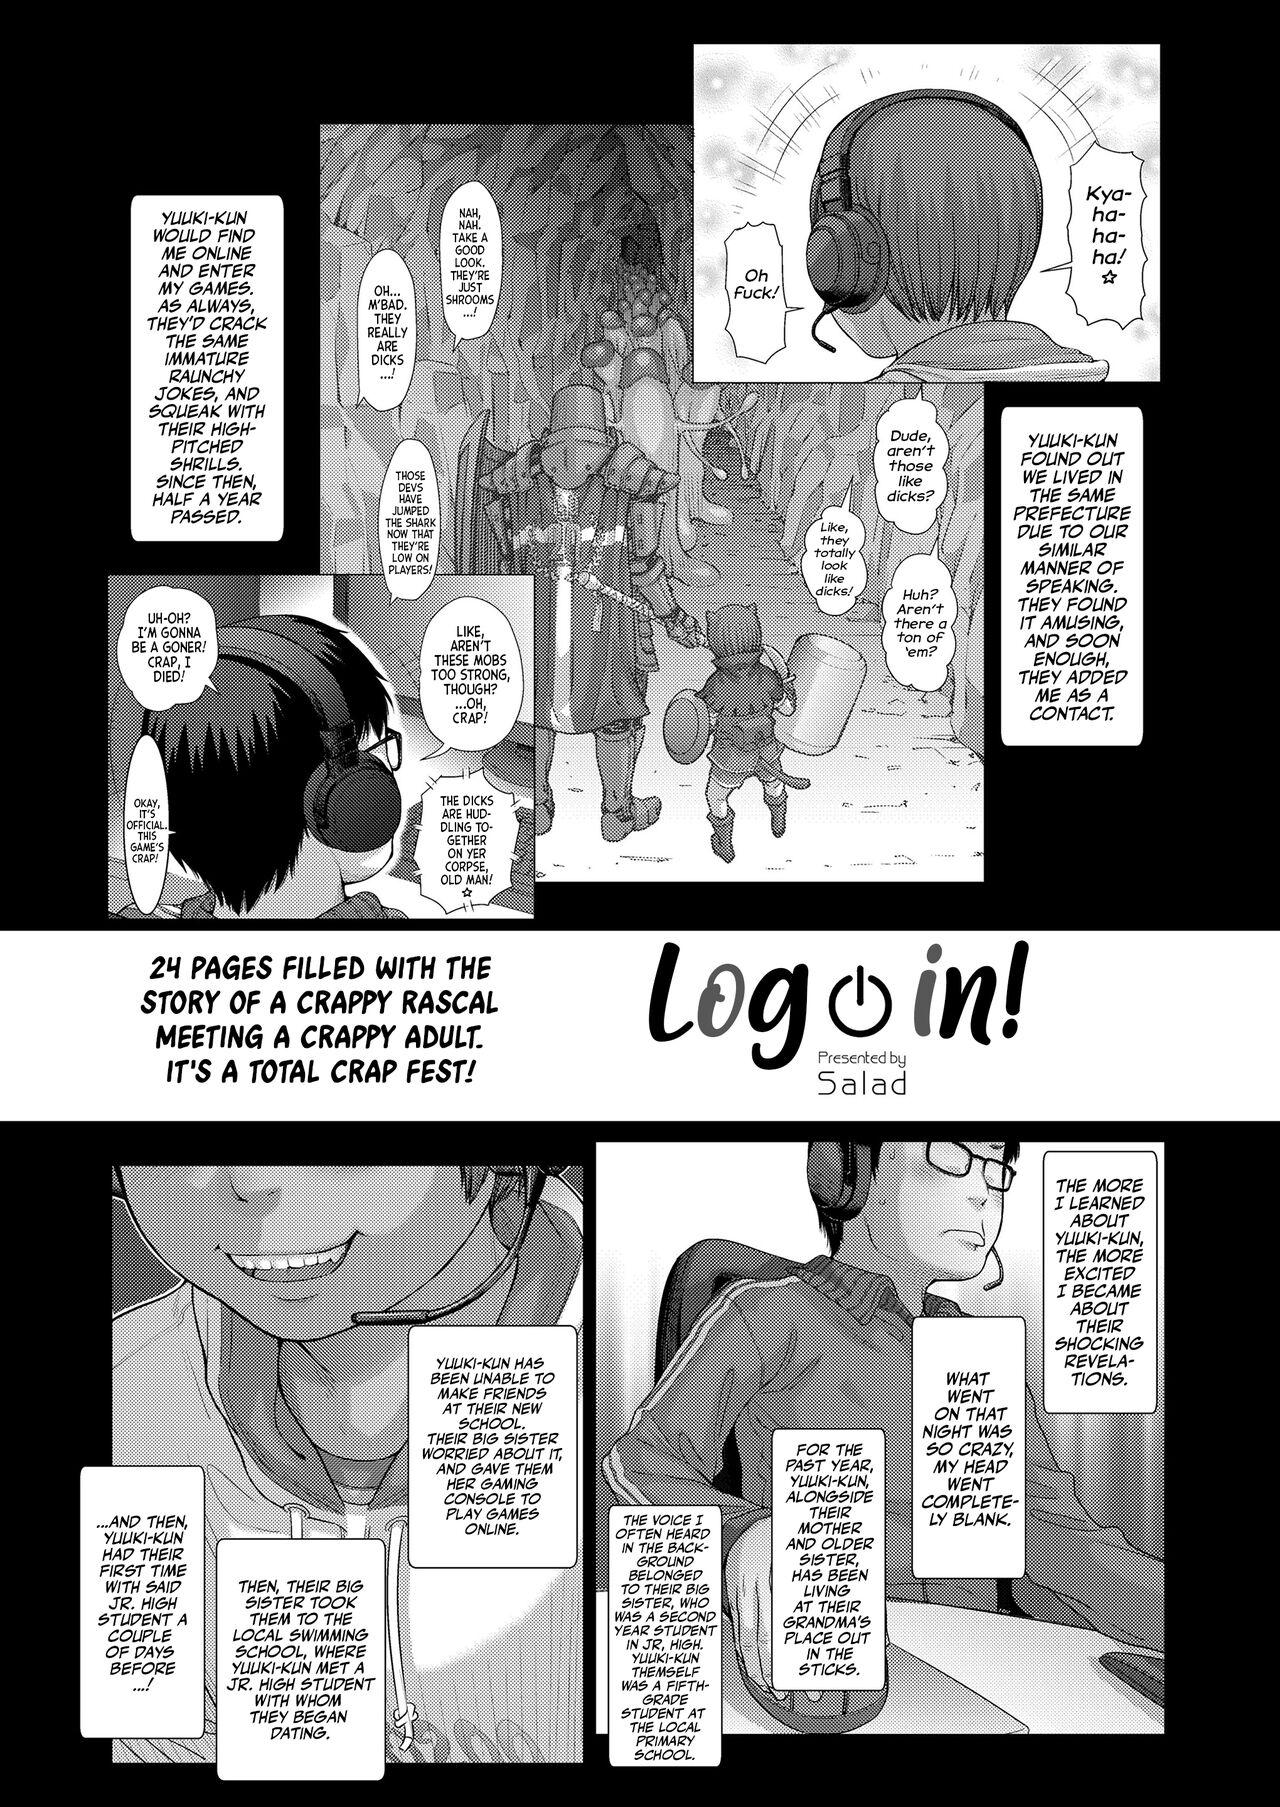 Latinos Log In! Dominant - Page 2